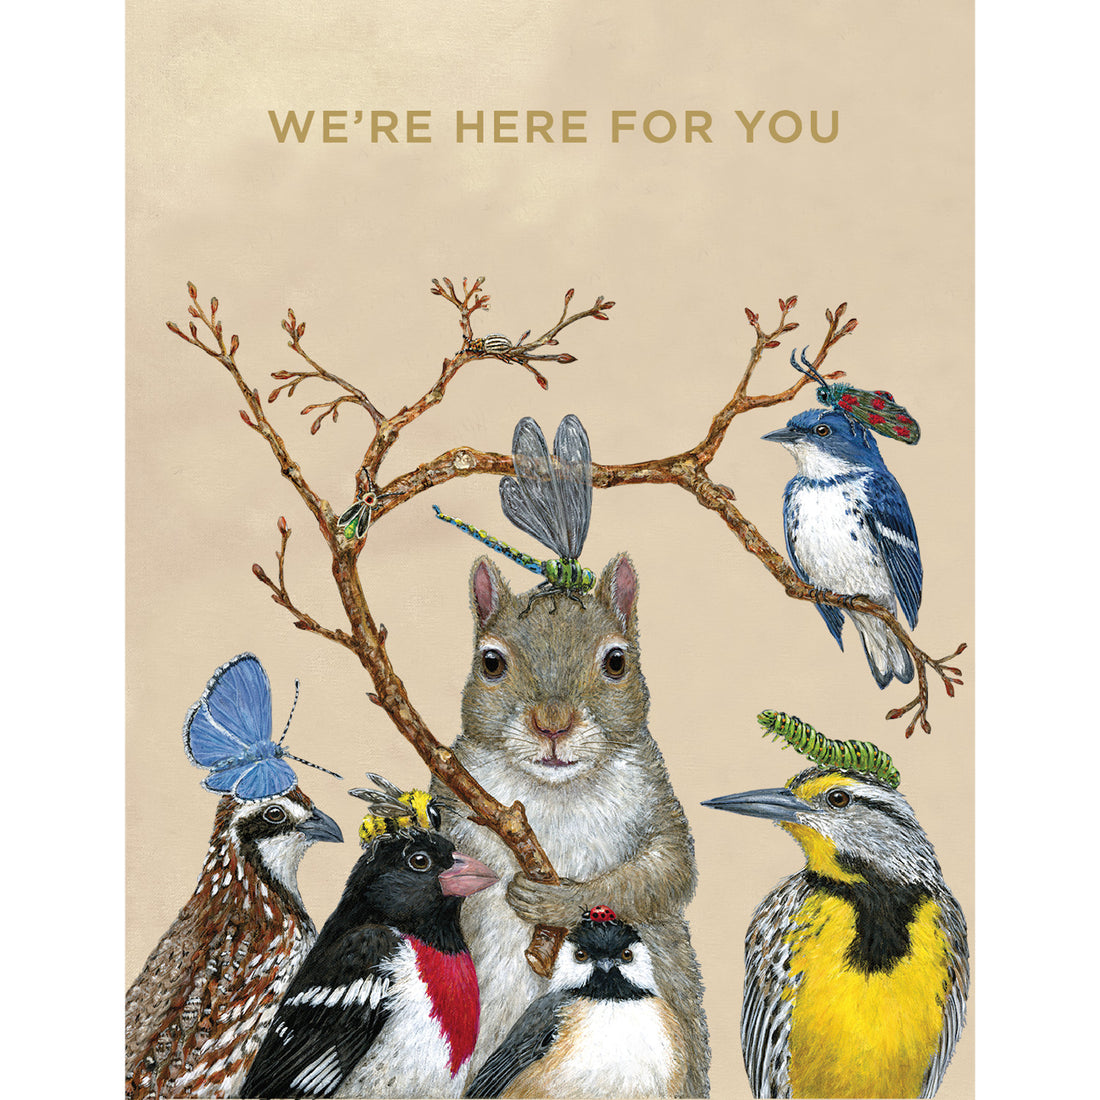 Adorable animals greeting card for your loved one: Here for You Crew Card by Hester &amp; Cook.